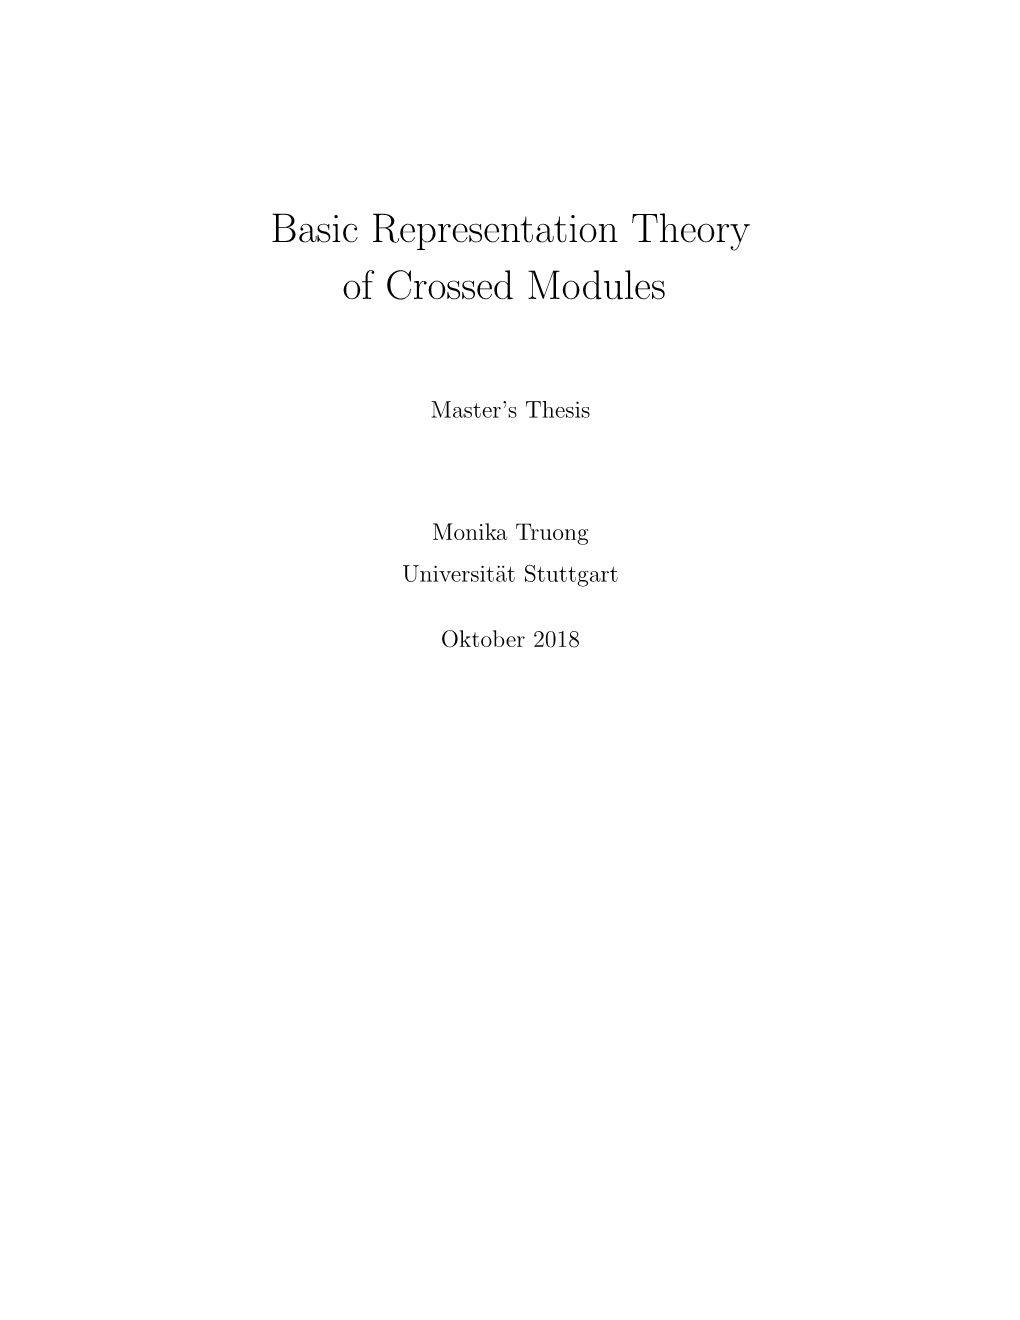 Basic Representation Theory of Crossed Modules